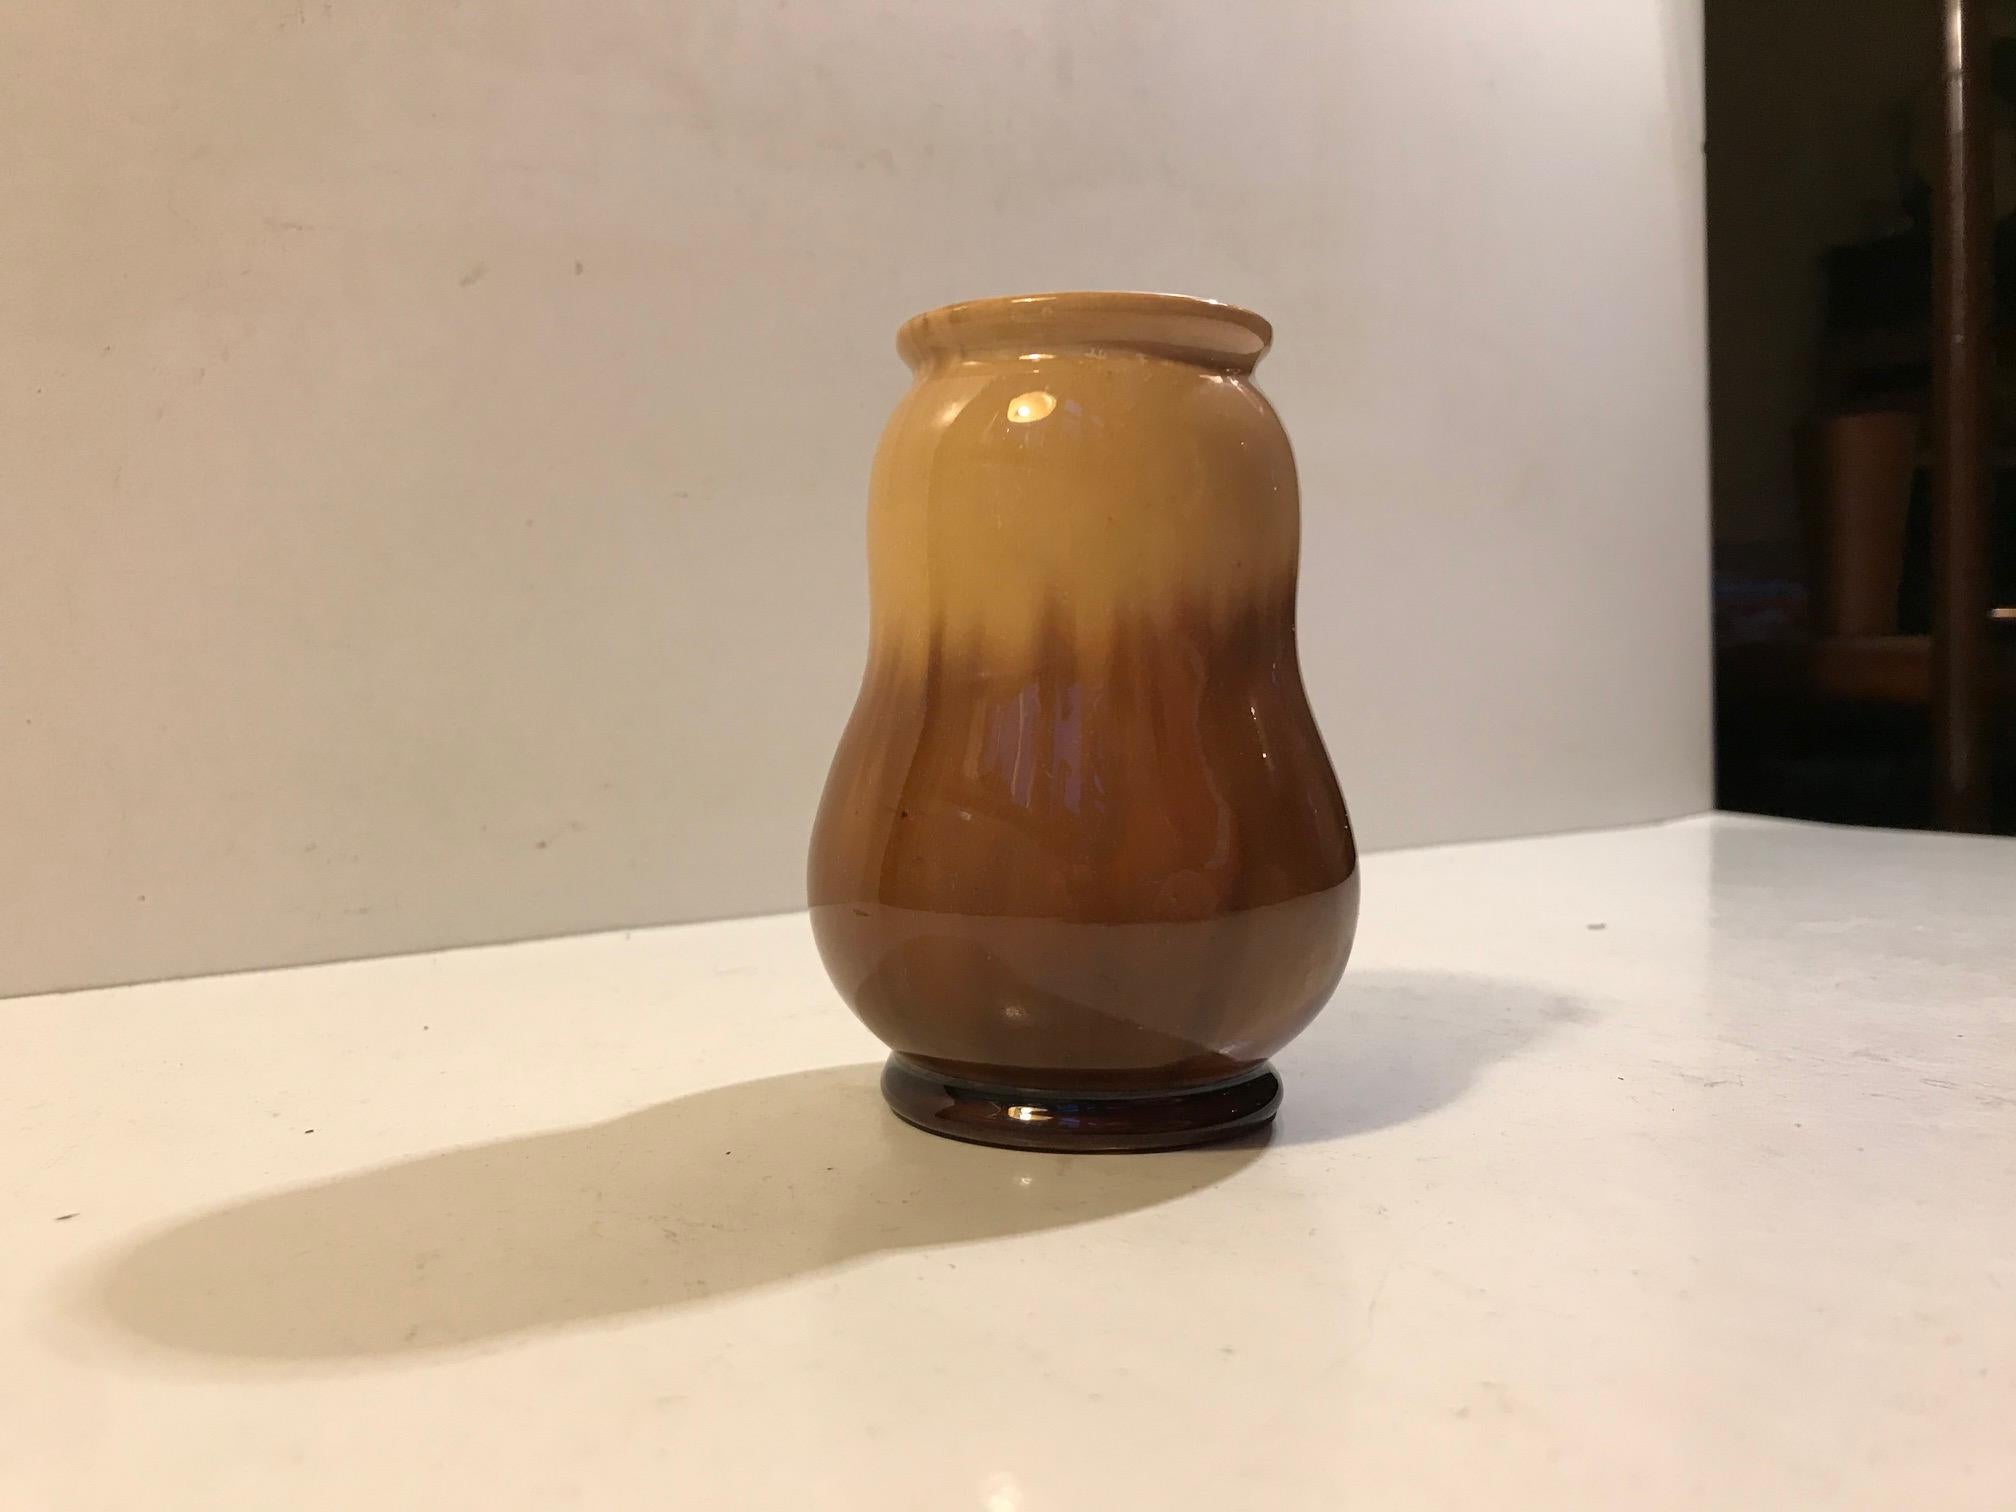 Small and early Danish Pottery vase with subtle Art Nouveau/Jugend styling and shape. Unusual caramel colored glazes. Designed by Michael Andersen & Son in Denmark between 1910-1920.